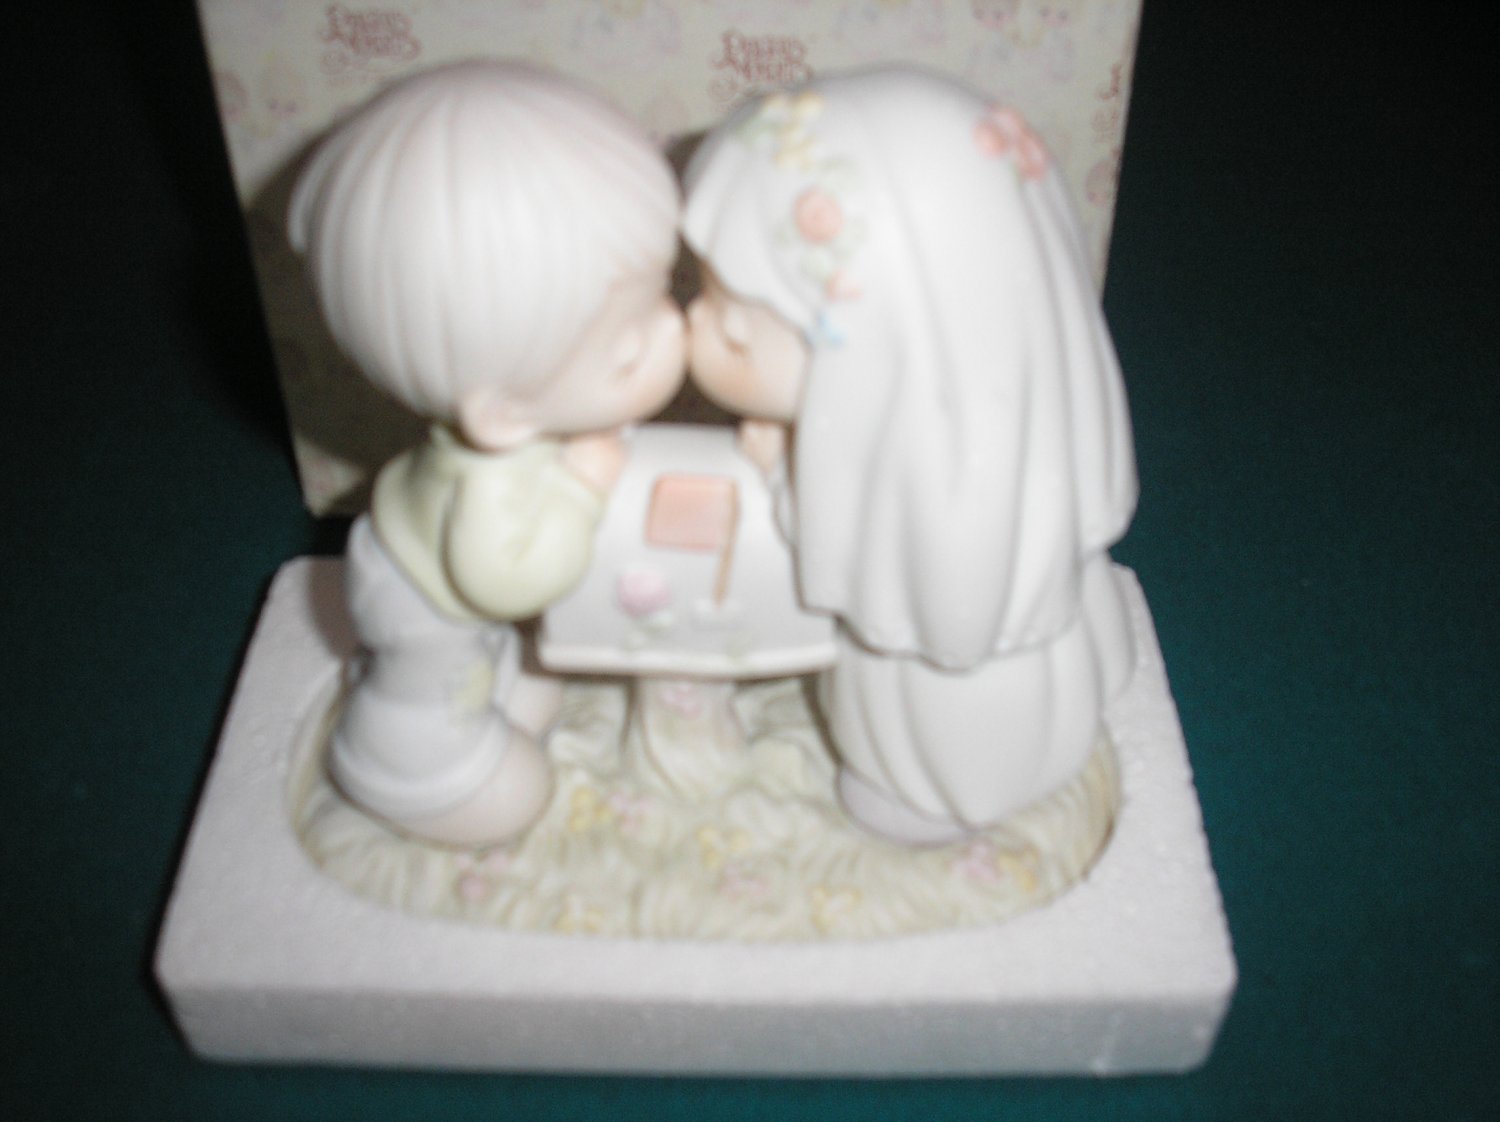 Precious Moments Sealed With A Kiss 524441 Figurine Bride And Groom